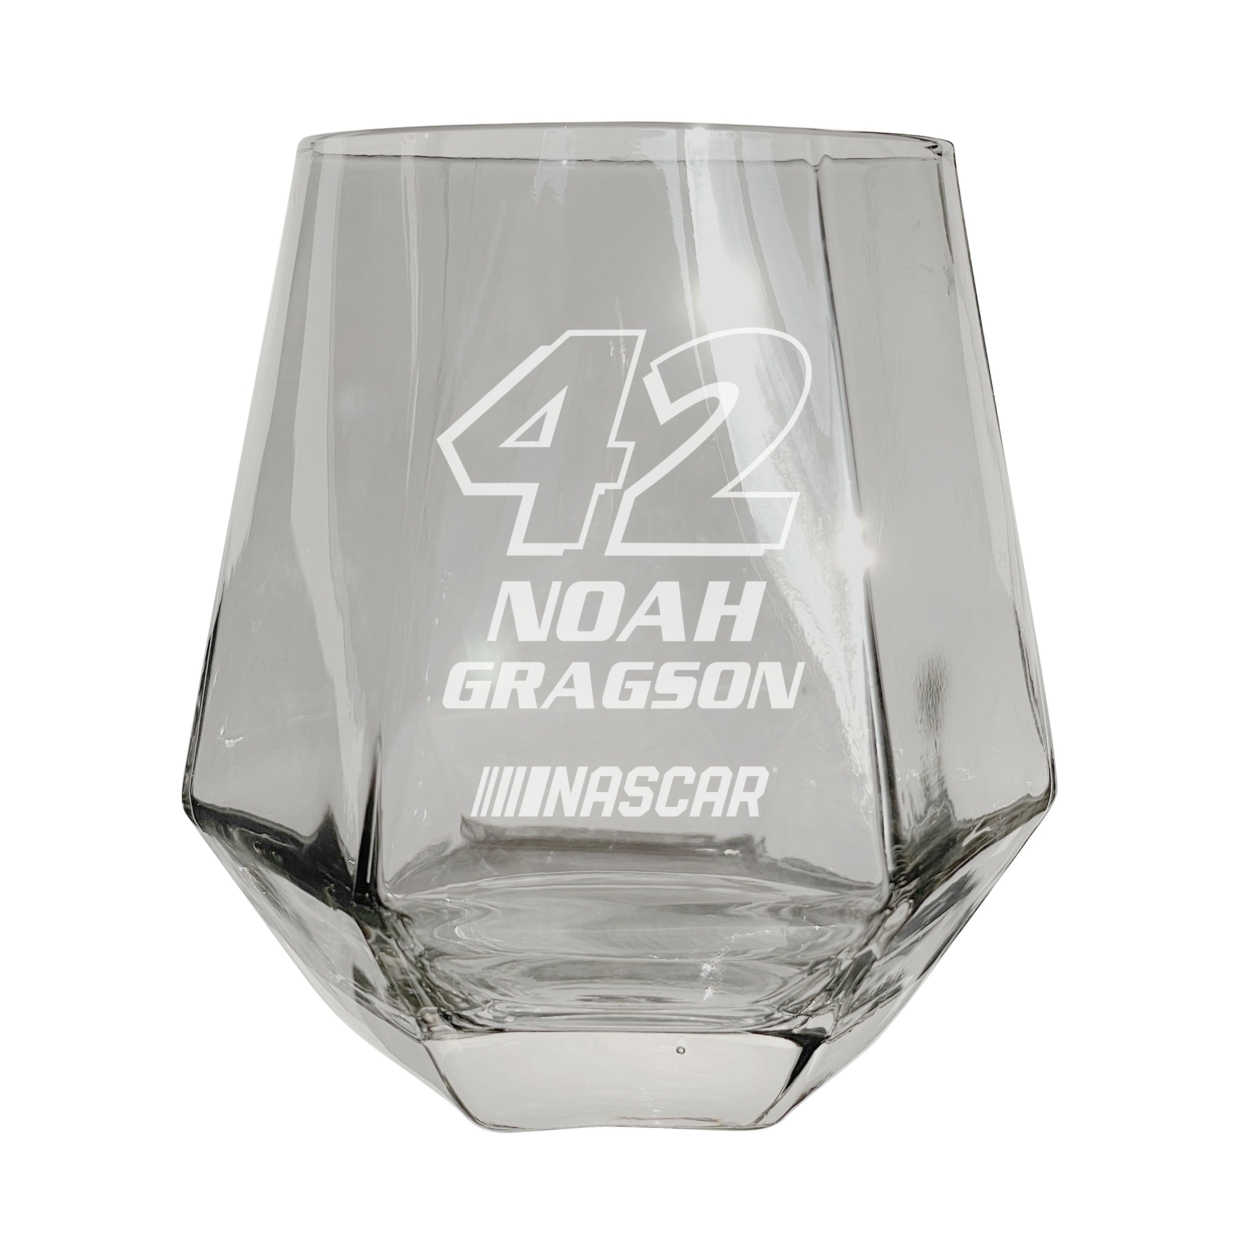 #42 Noah Gragson Officially Licensed 10 Oz Engraved Diamond Wine Glass - Clear, 2-Pack